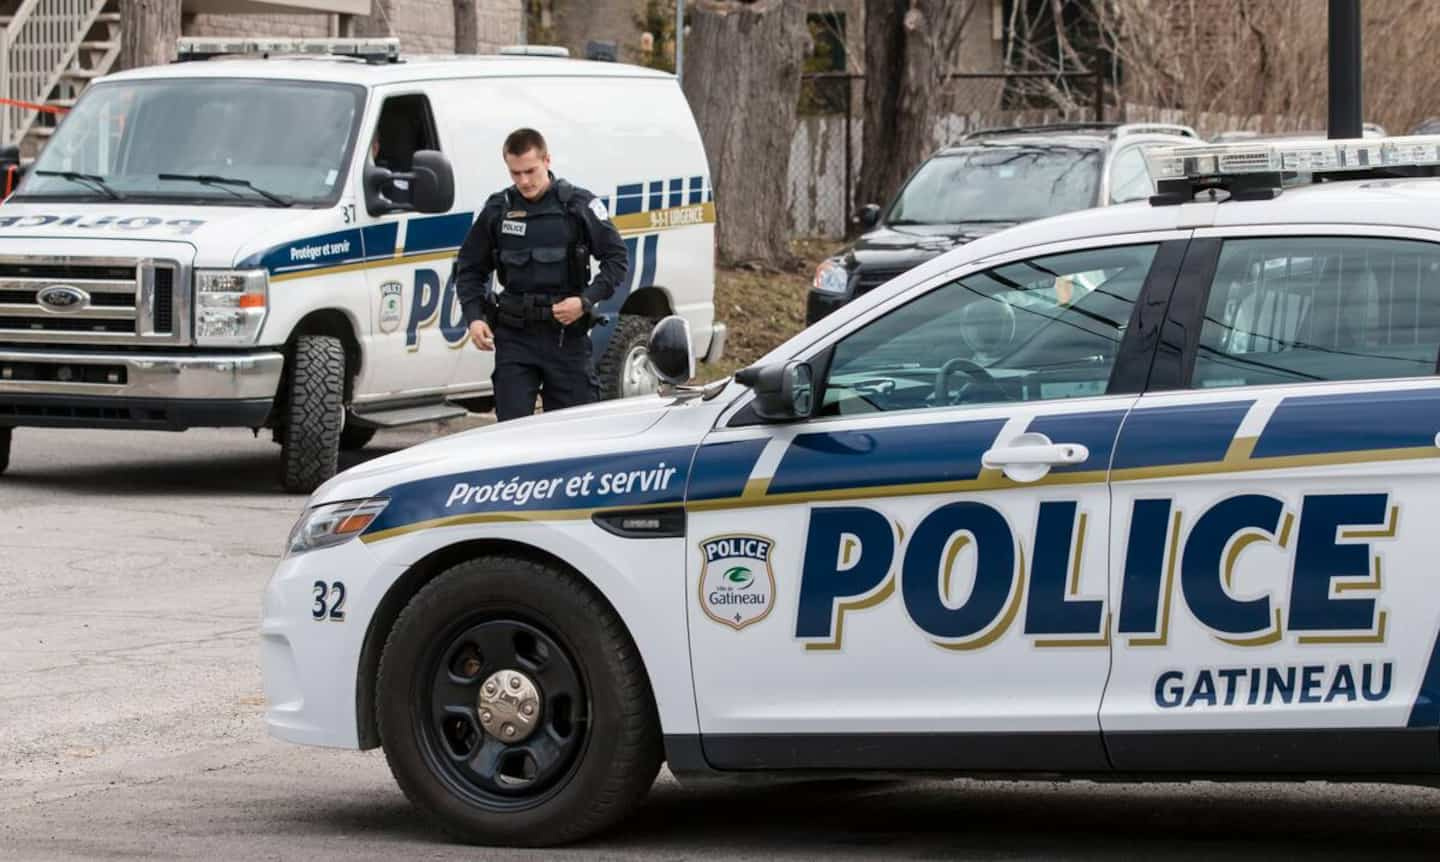 Suspect arrested after attempted murder in Gatineau